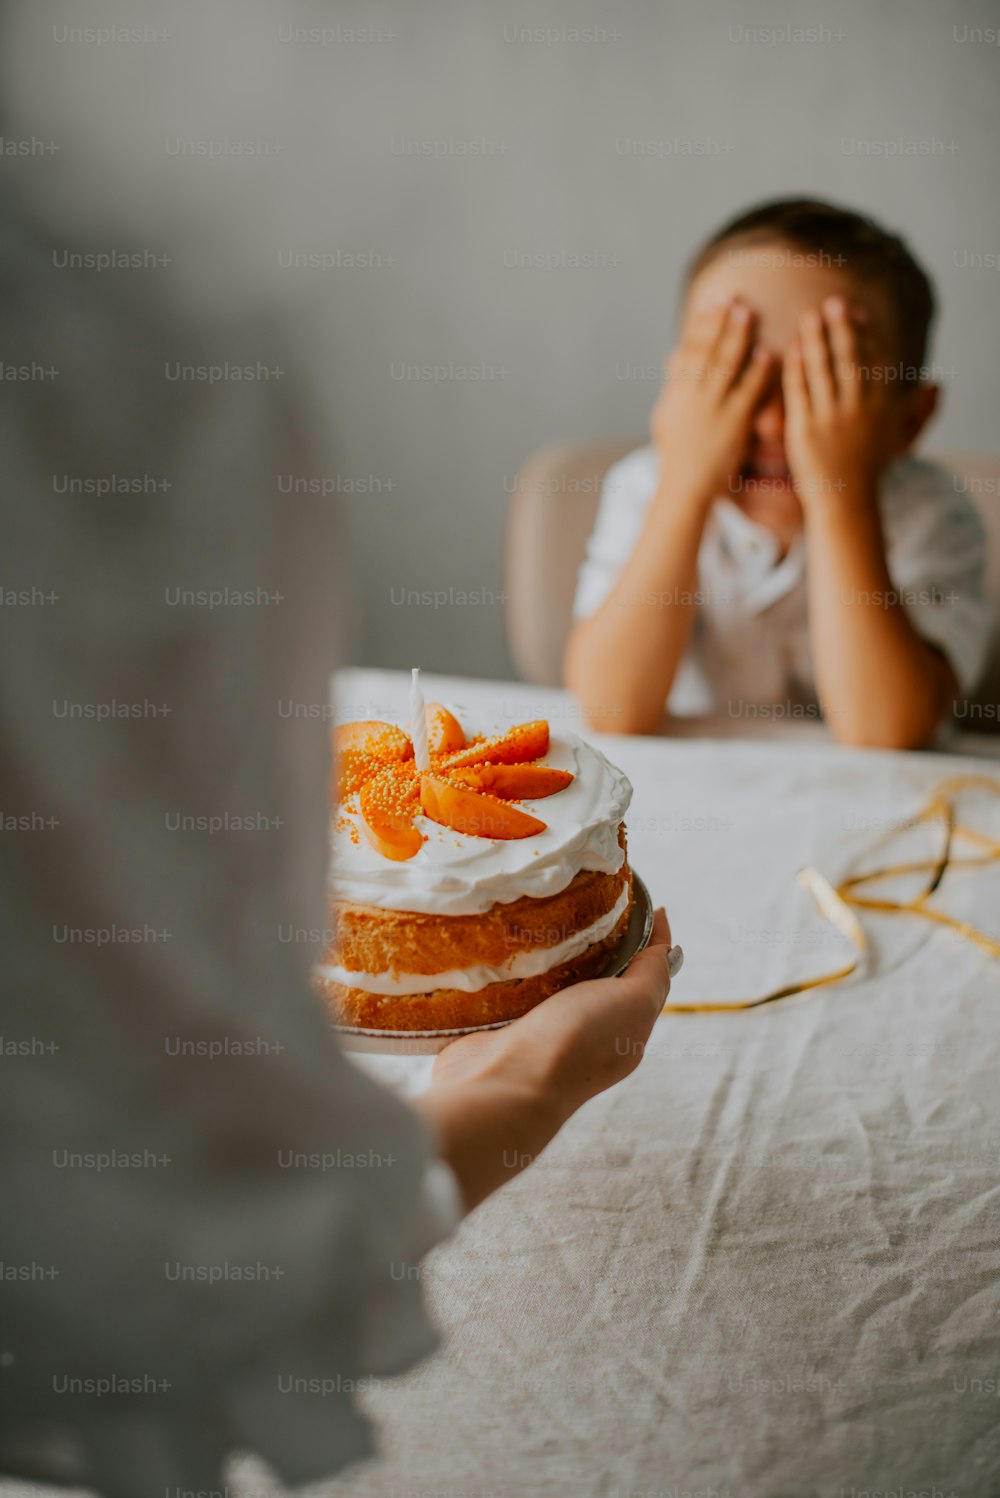 a person holding a cake with oranges on it